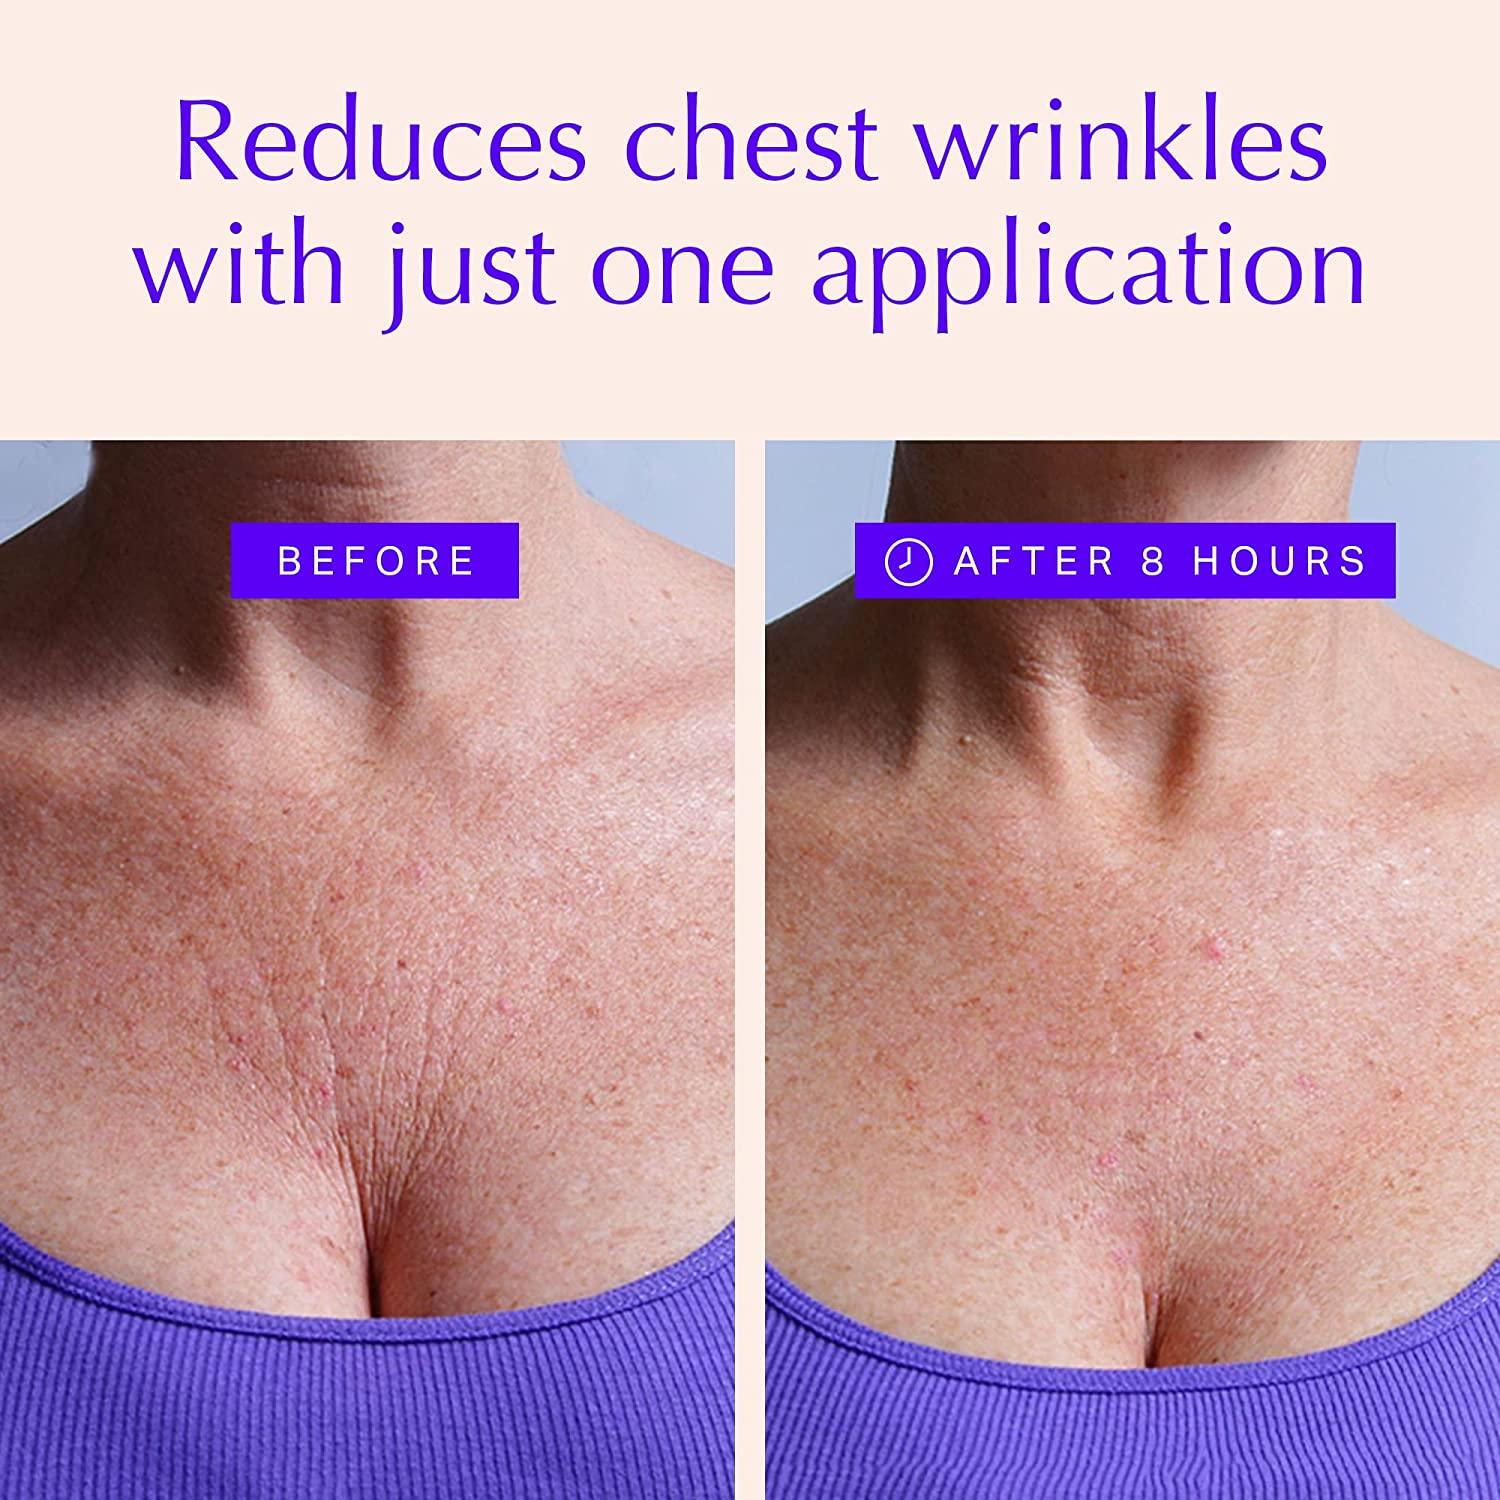 Erase Chest Wrinkles - Skin Care Products For Women - MesoLyft